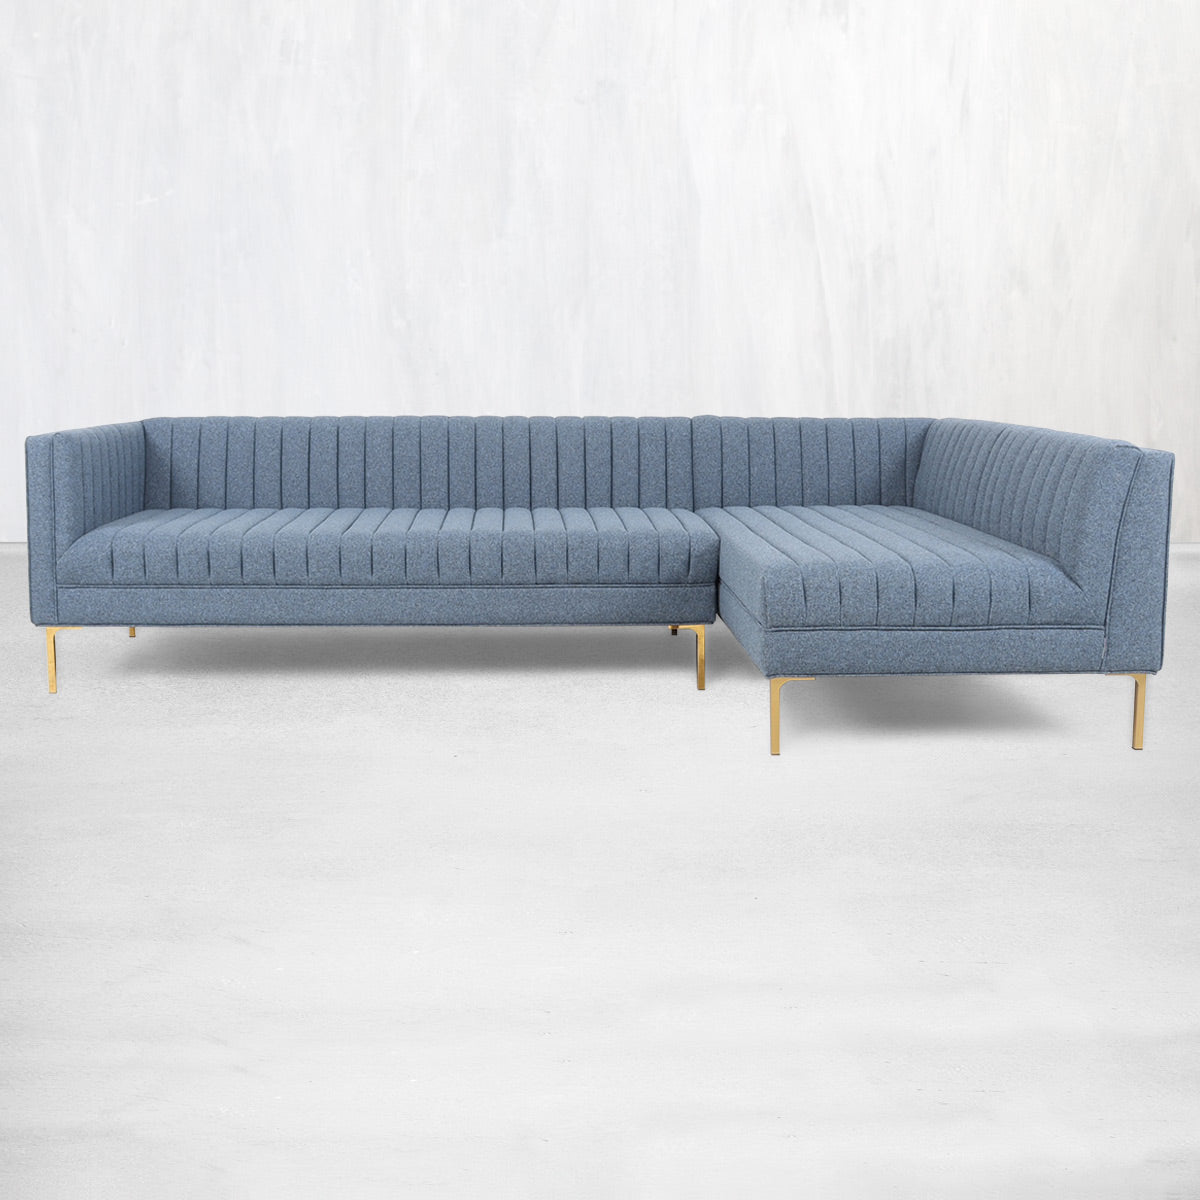 Manhattan Sectional with Channel Tufted Seats